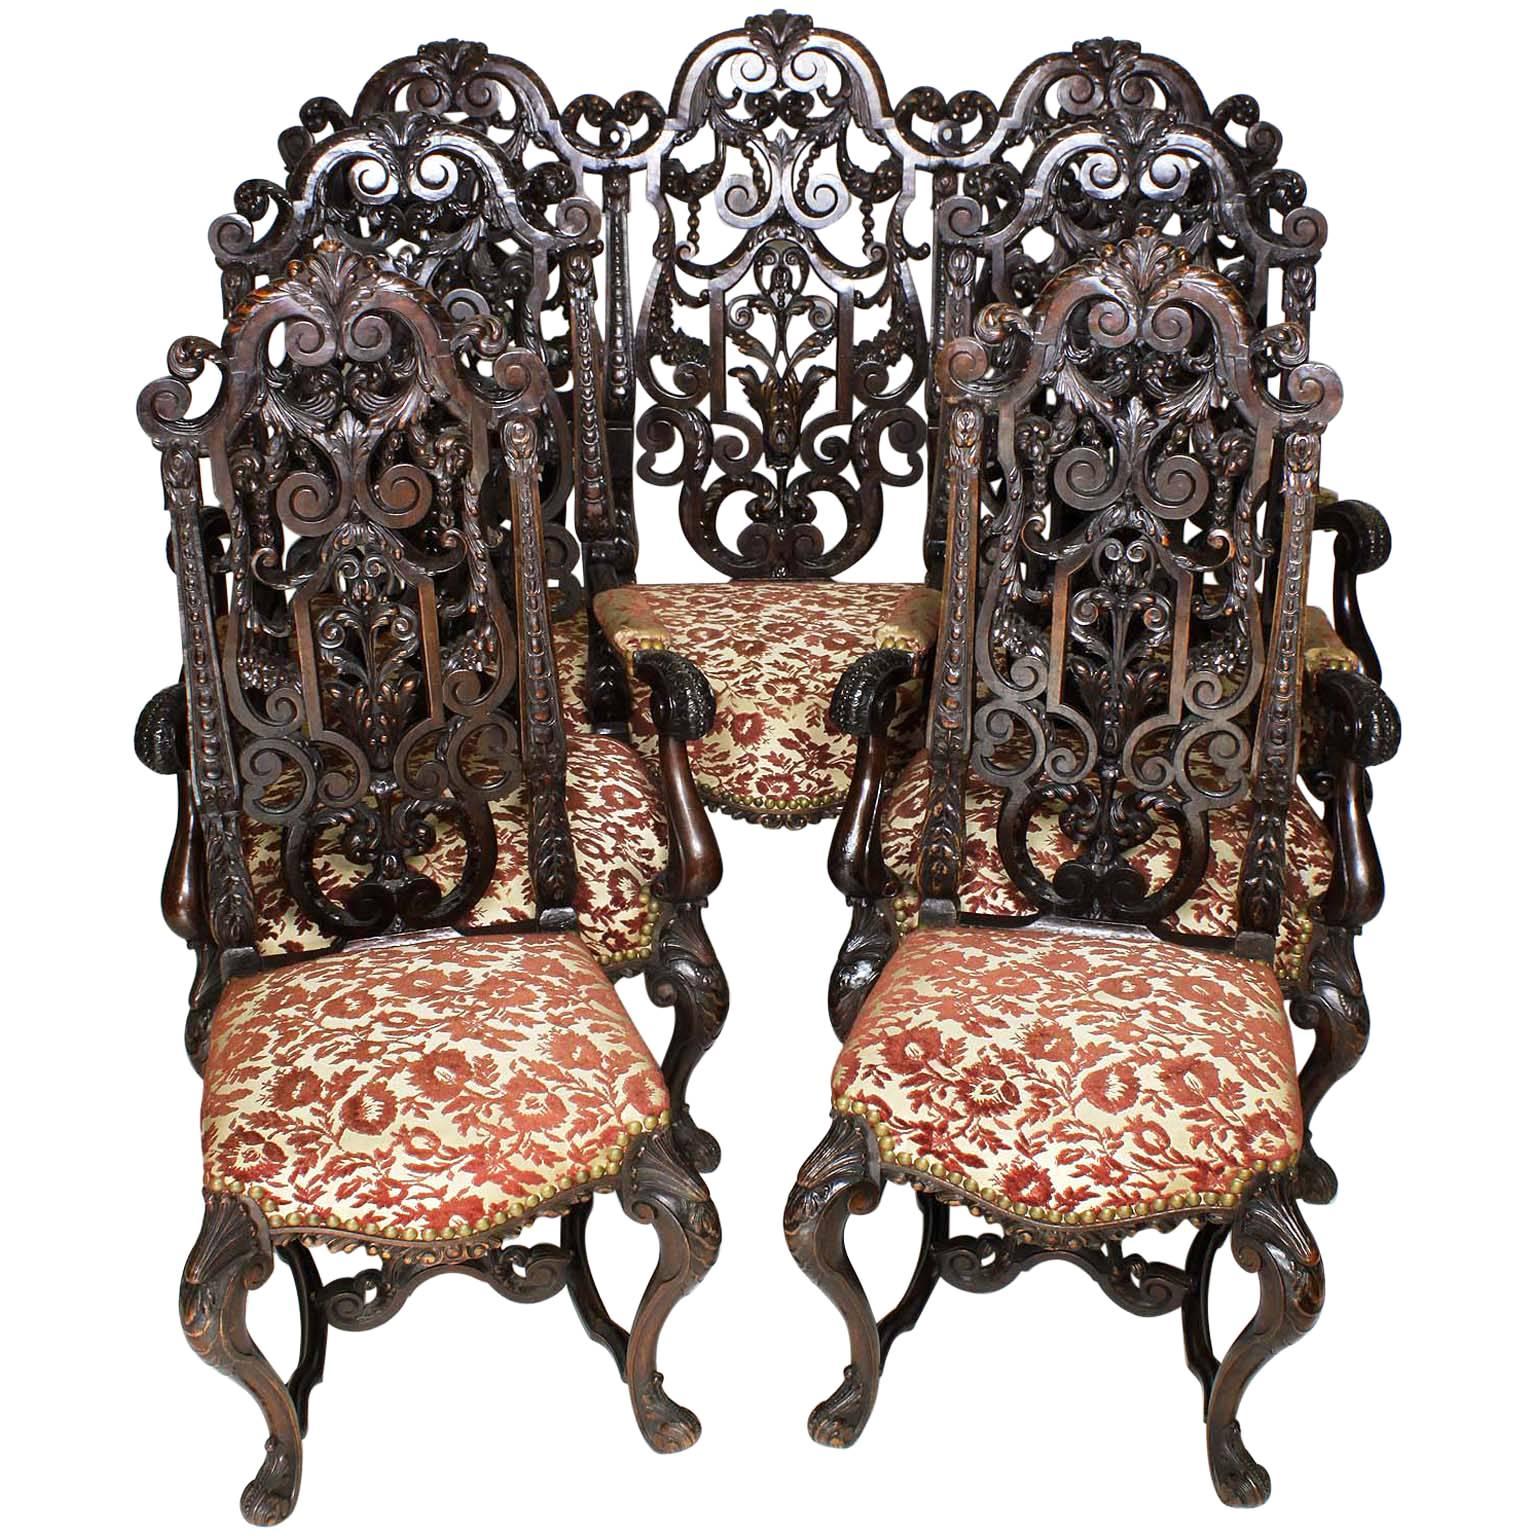 An Anglo-Dutch 19th Century Walnut Carved 5 Piece Parlor Set, After Daniel Marot